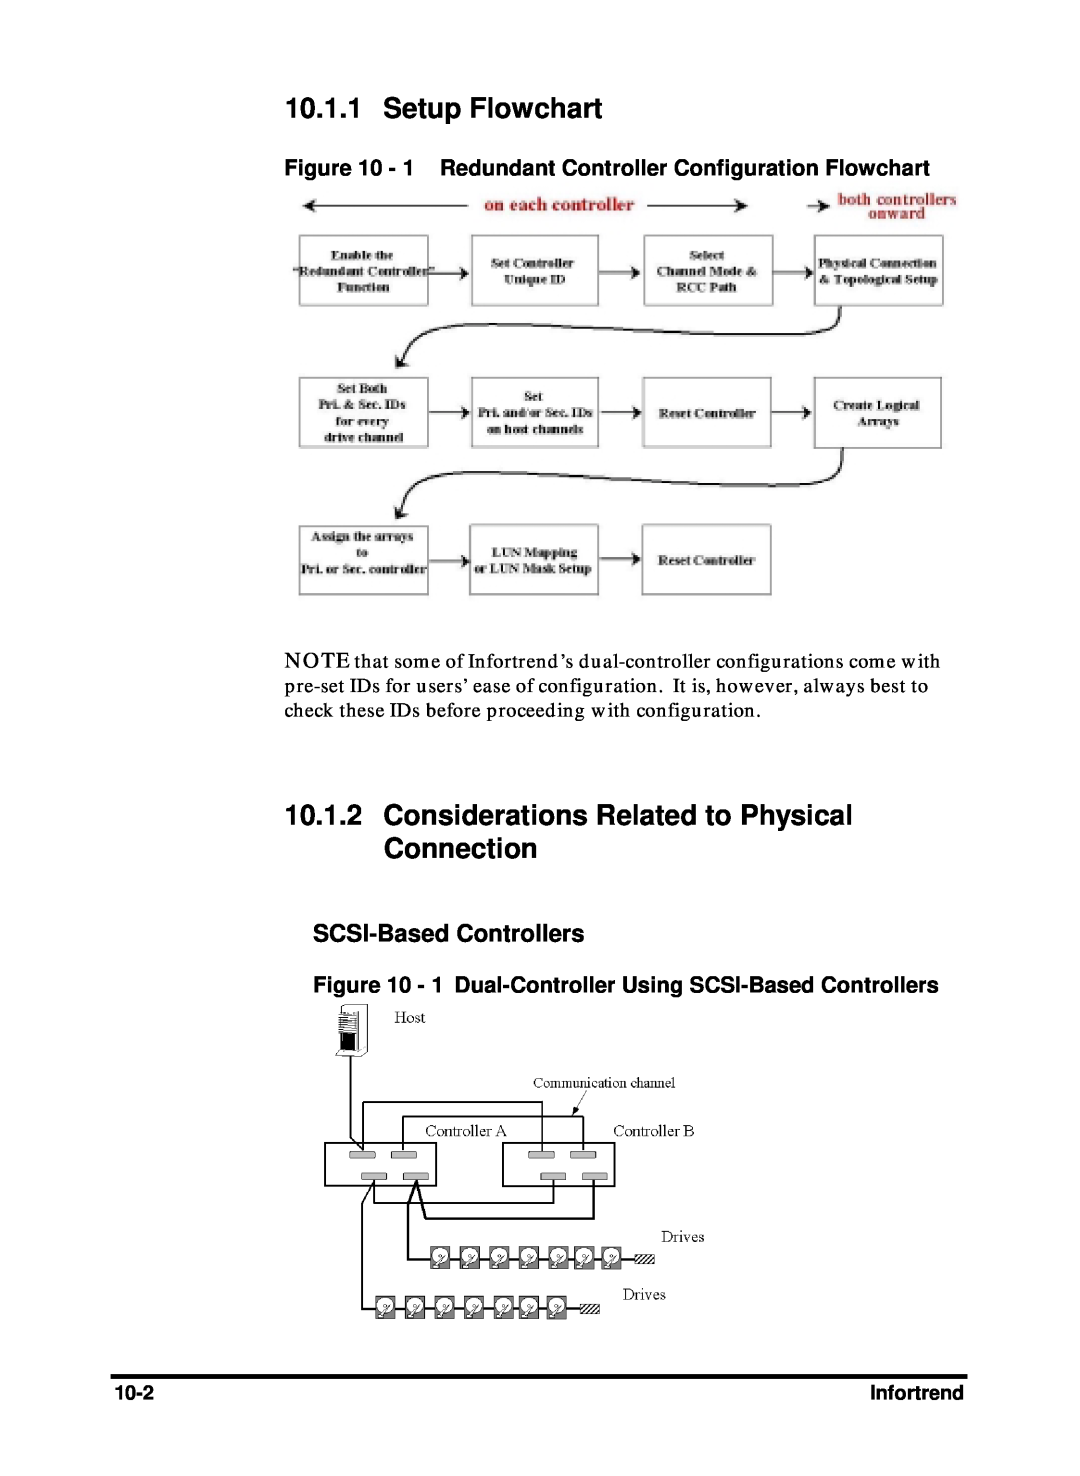 Compaq Infortrend manual Setup Flowchart, Considerations Related to Physical Connection, SCSI-Based Controllers 